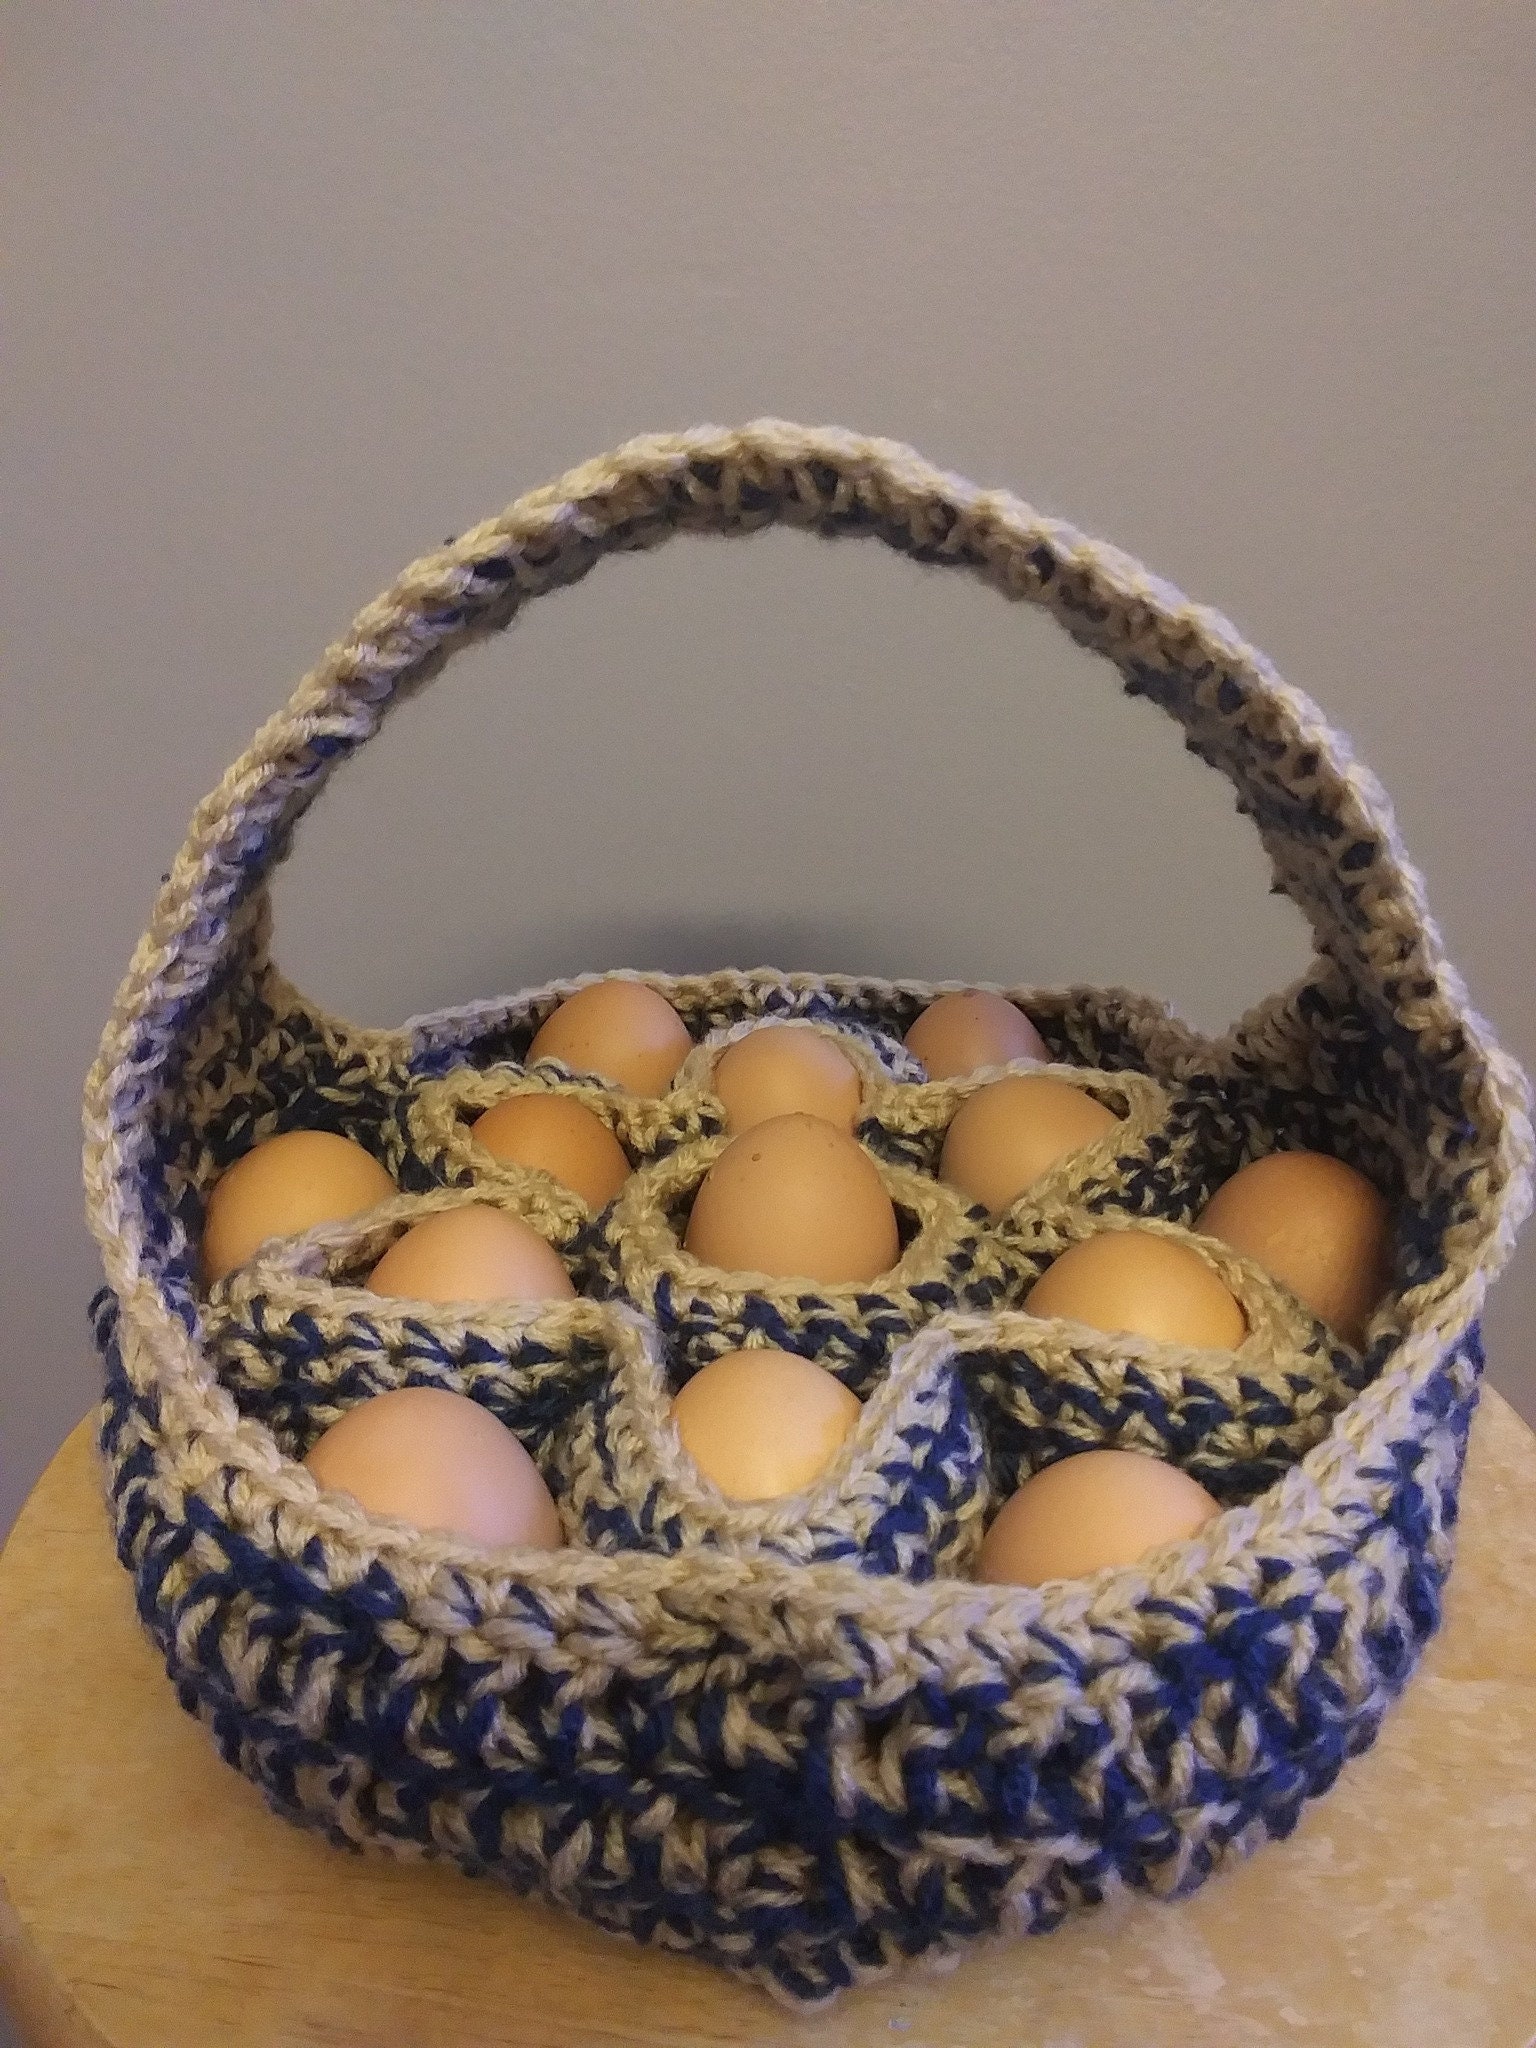 Egg Basket, Chicken Wire Egg Collection Baskets for Gathering Fresh  Eggs,Ceramic Fresh Egg Holders Countertop (Berry) in Saudi Arabia